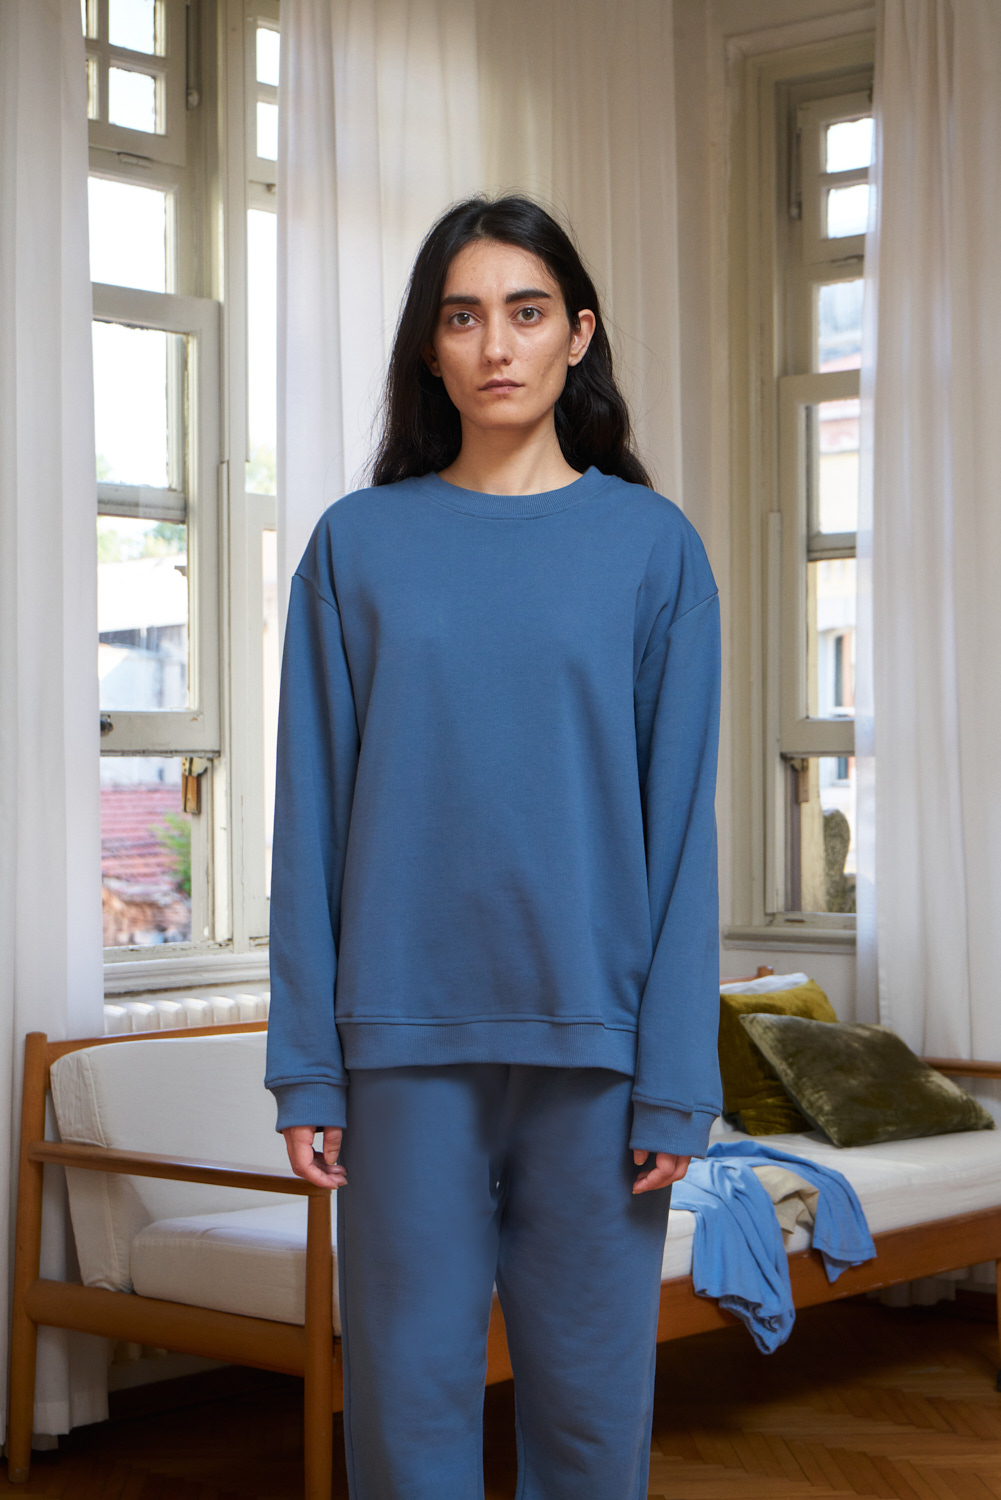 Sea blue coloured organic cotton sweatshirt. Loose fit and rib details on the hemline and sleeves.